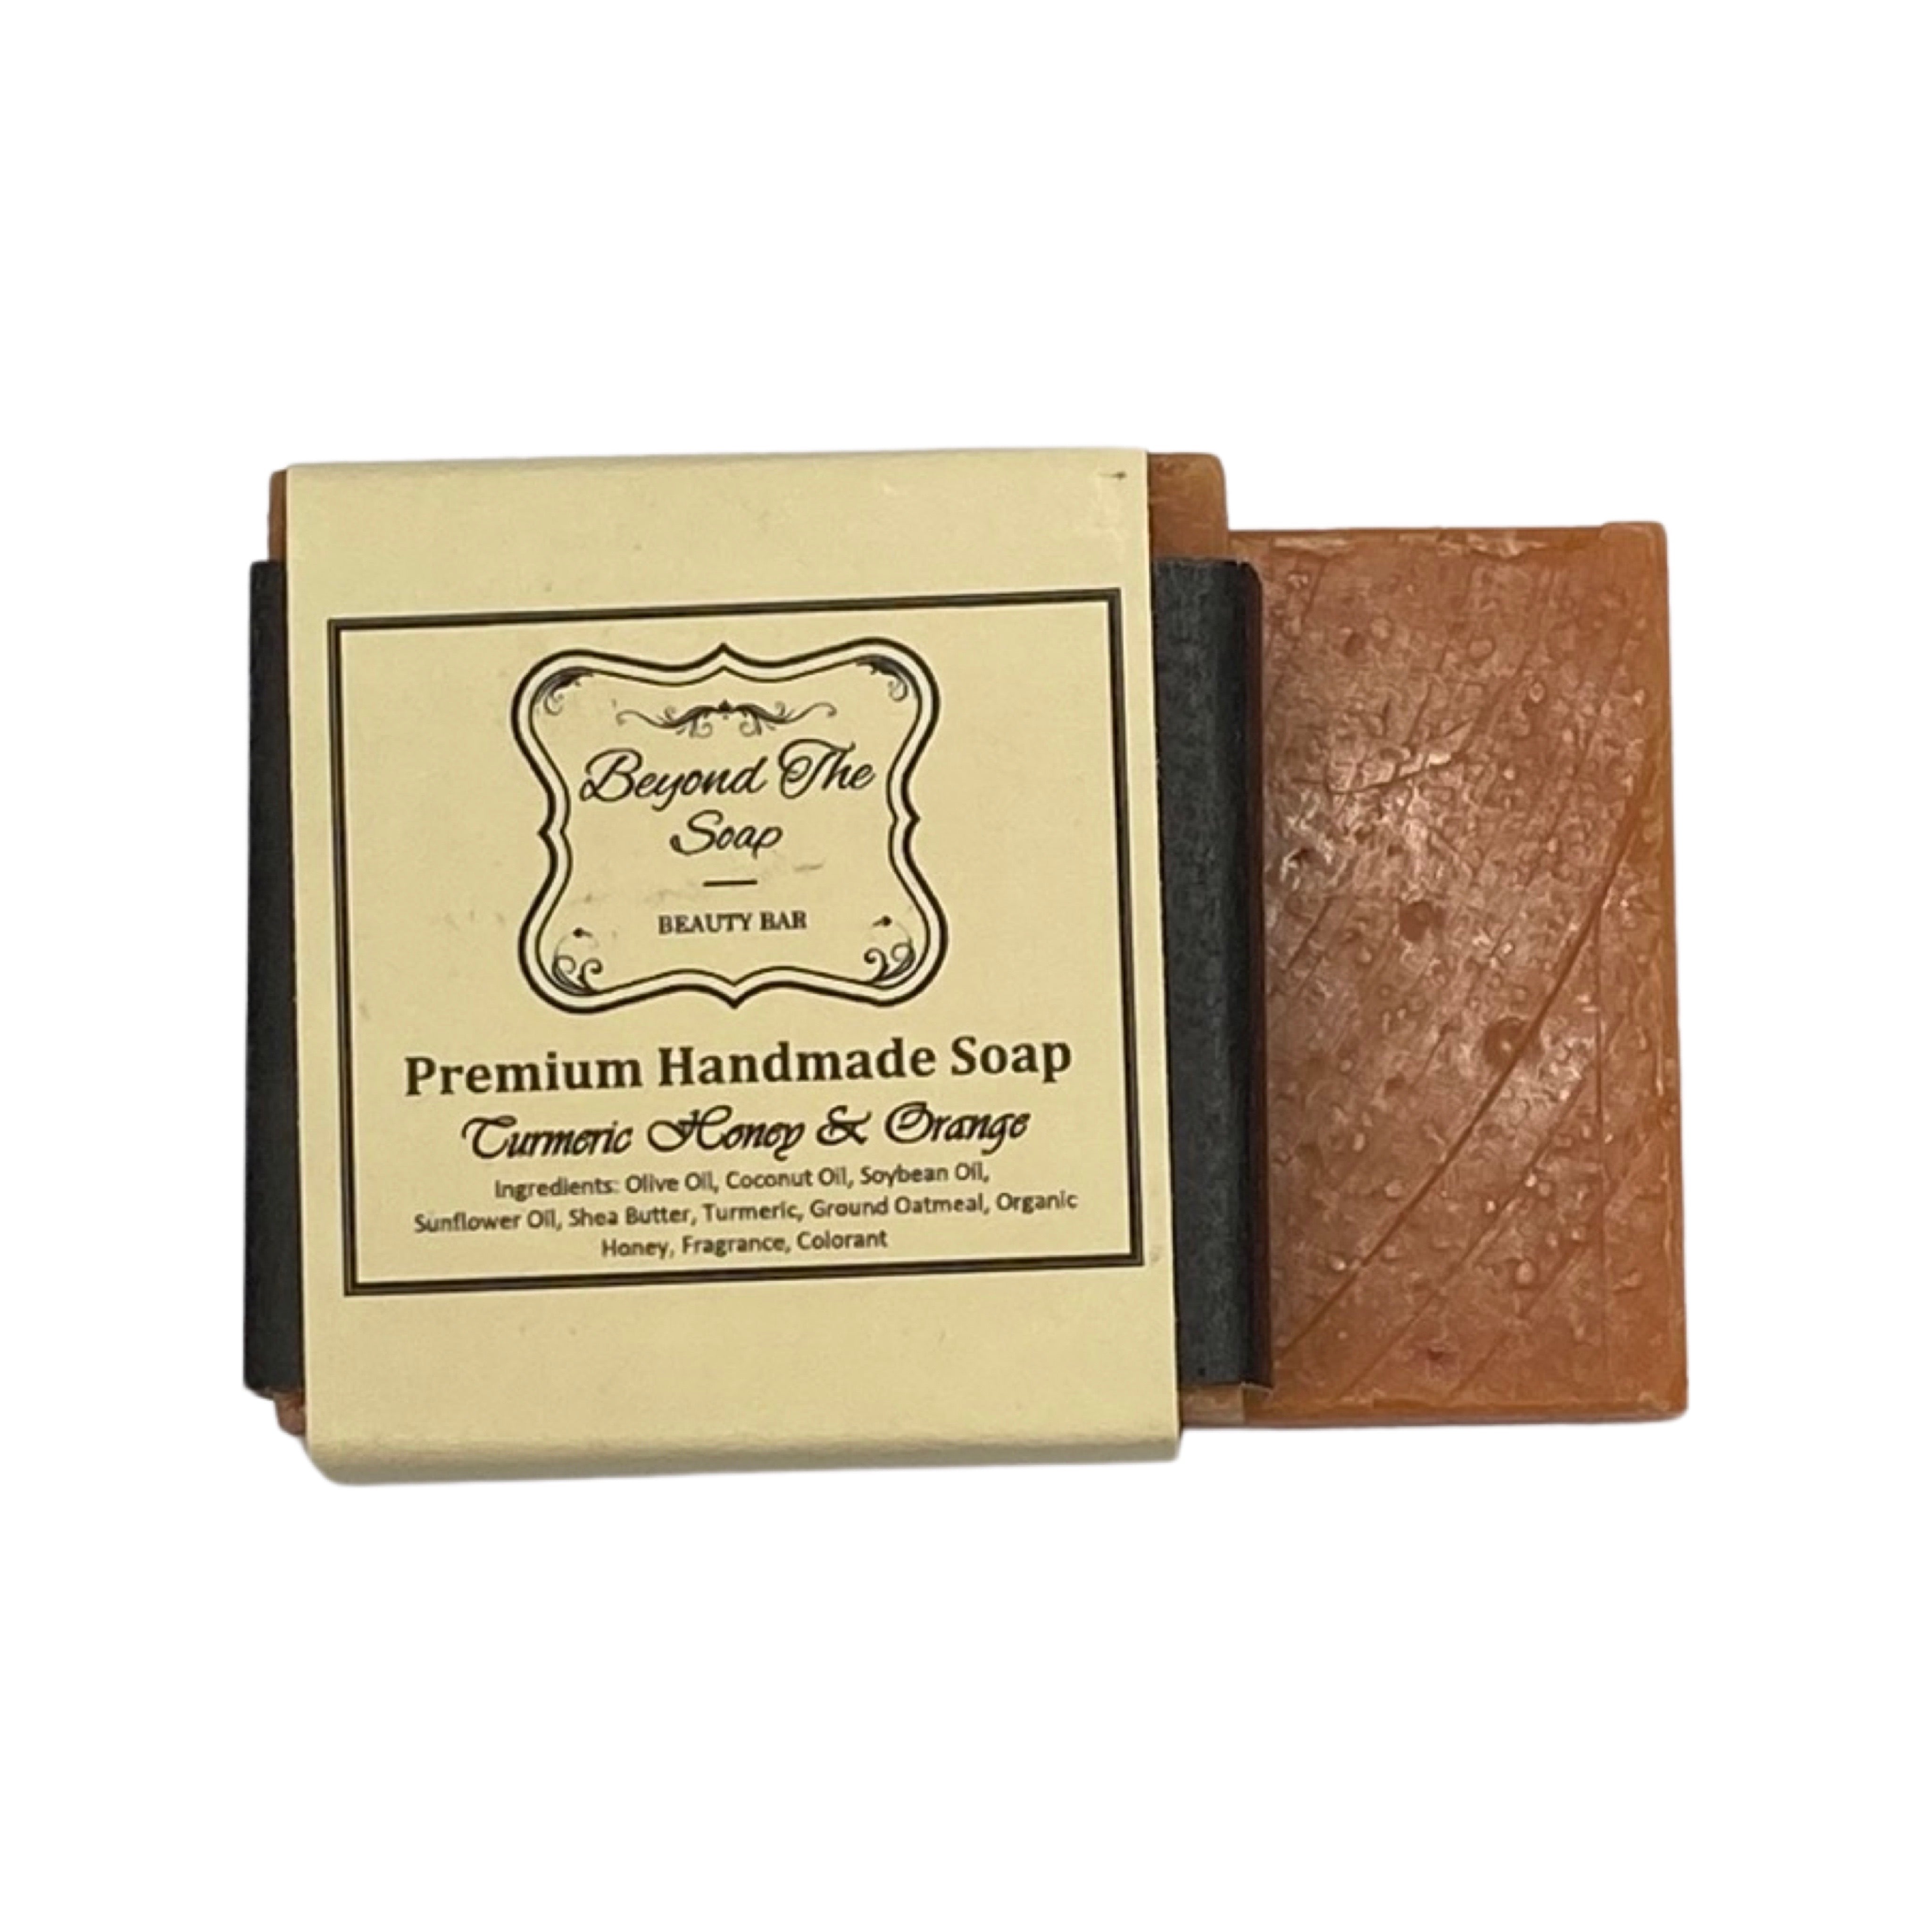 Premium Hand Made Soap Bar - Beyond the Soap